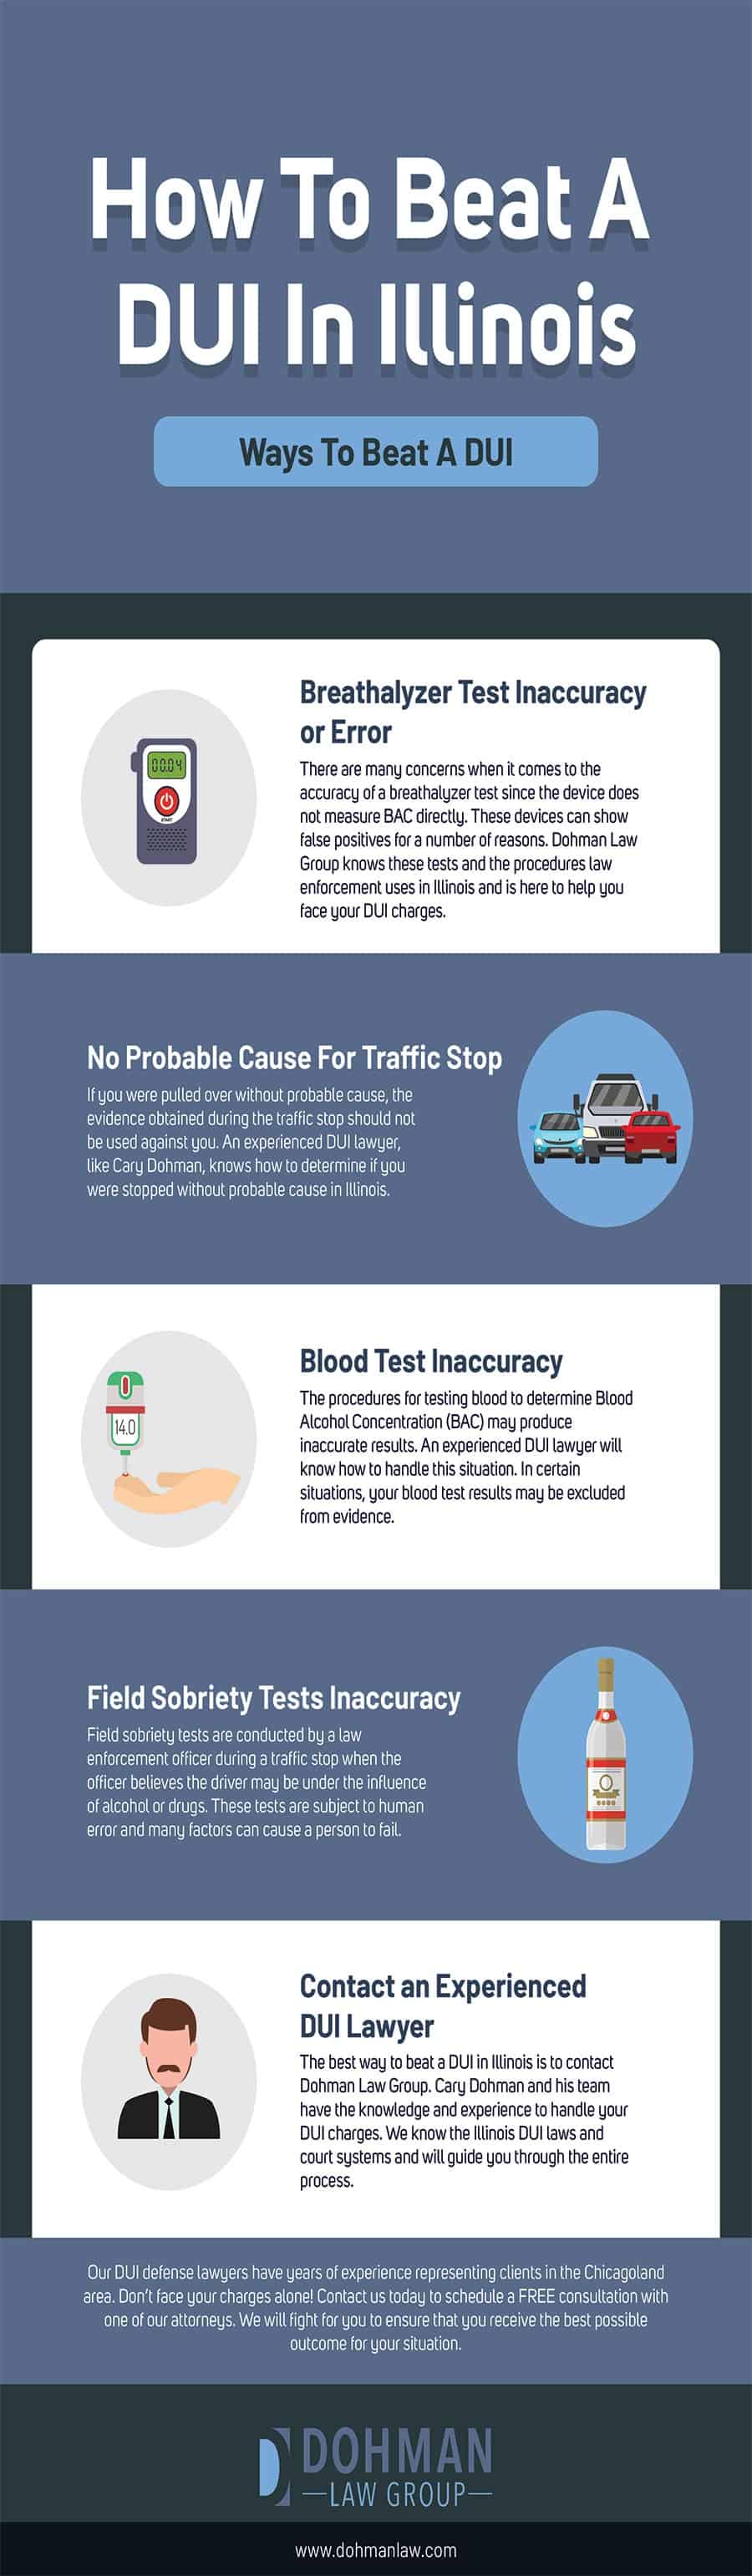 How To Beat A DUI In Illinois Four Proven Methods!